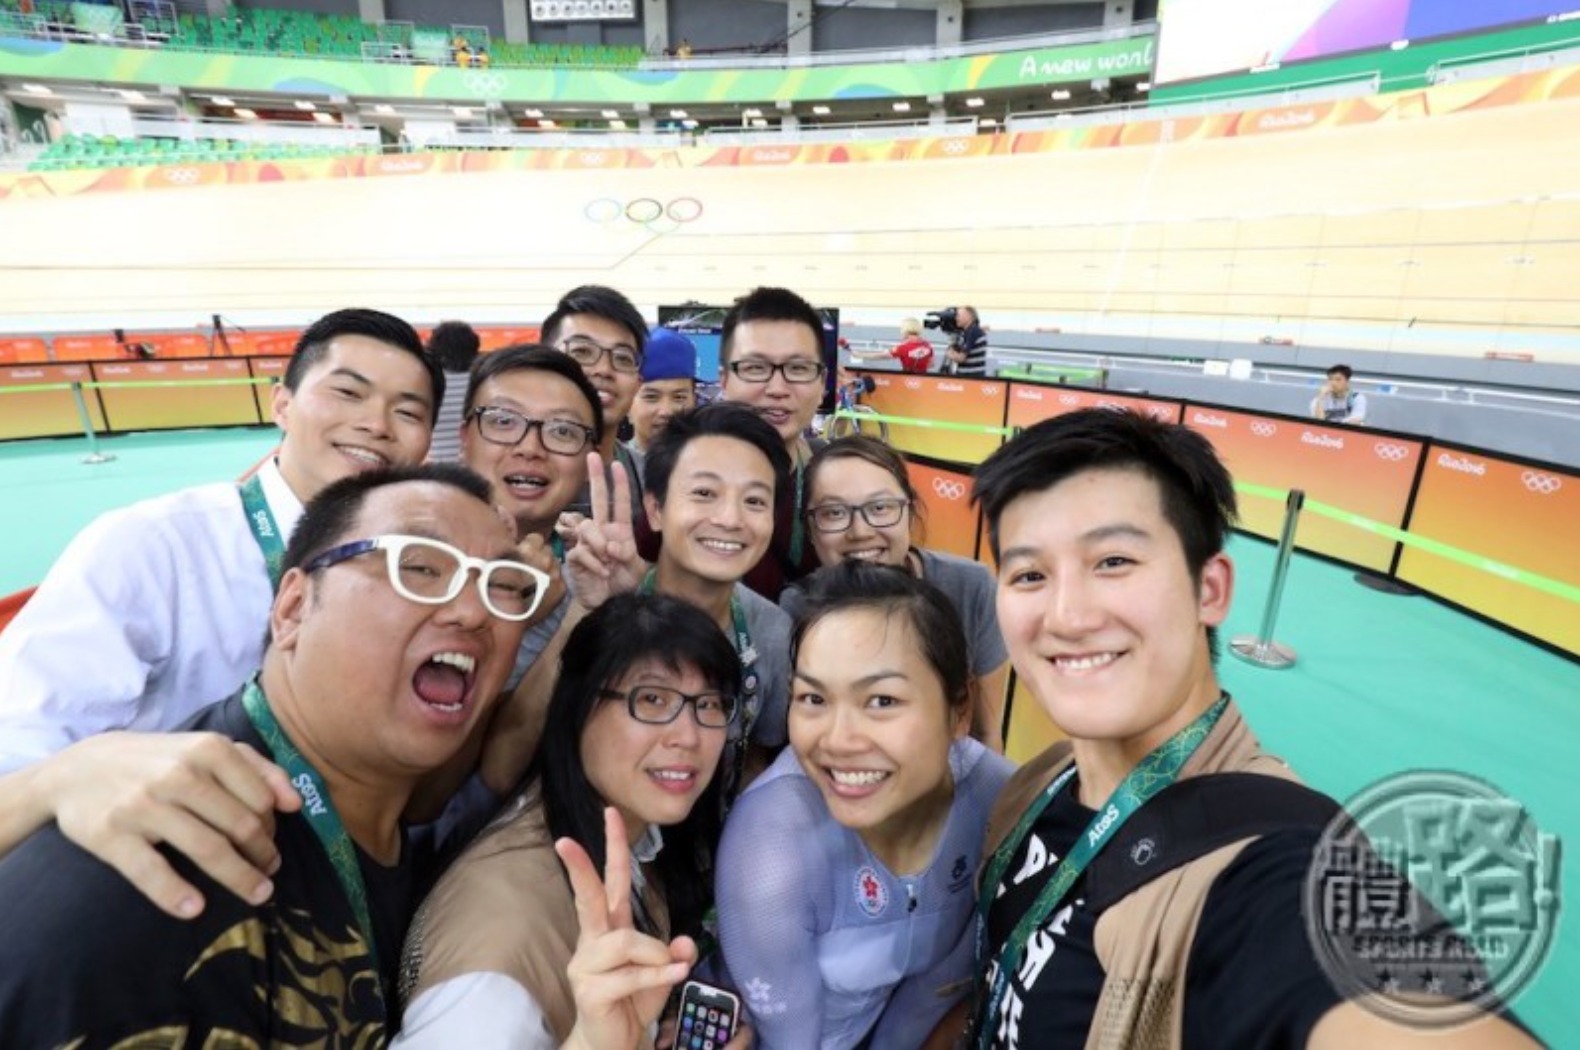 An interview with alumna Faye Chui, founder of “Sportsroad”